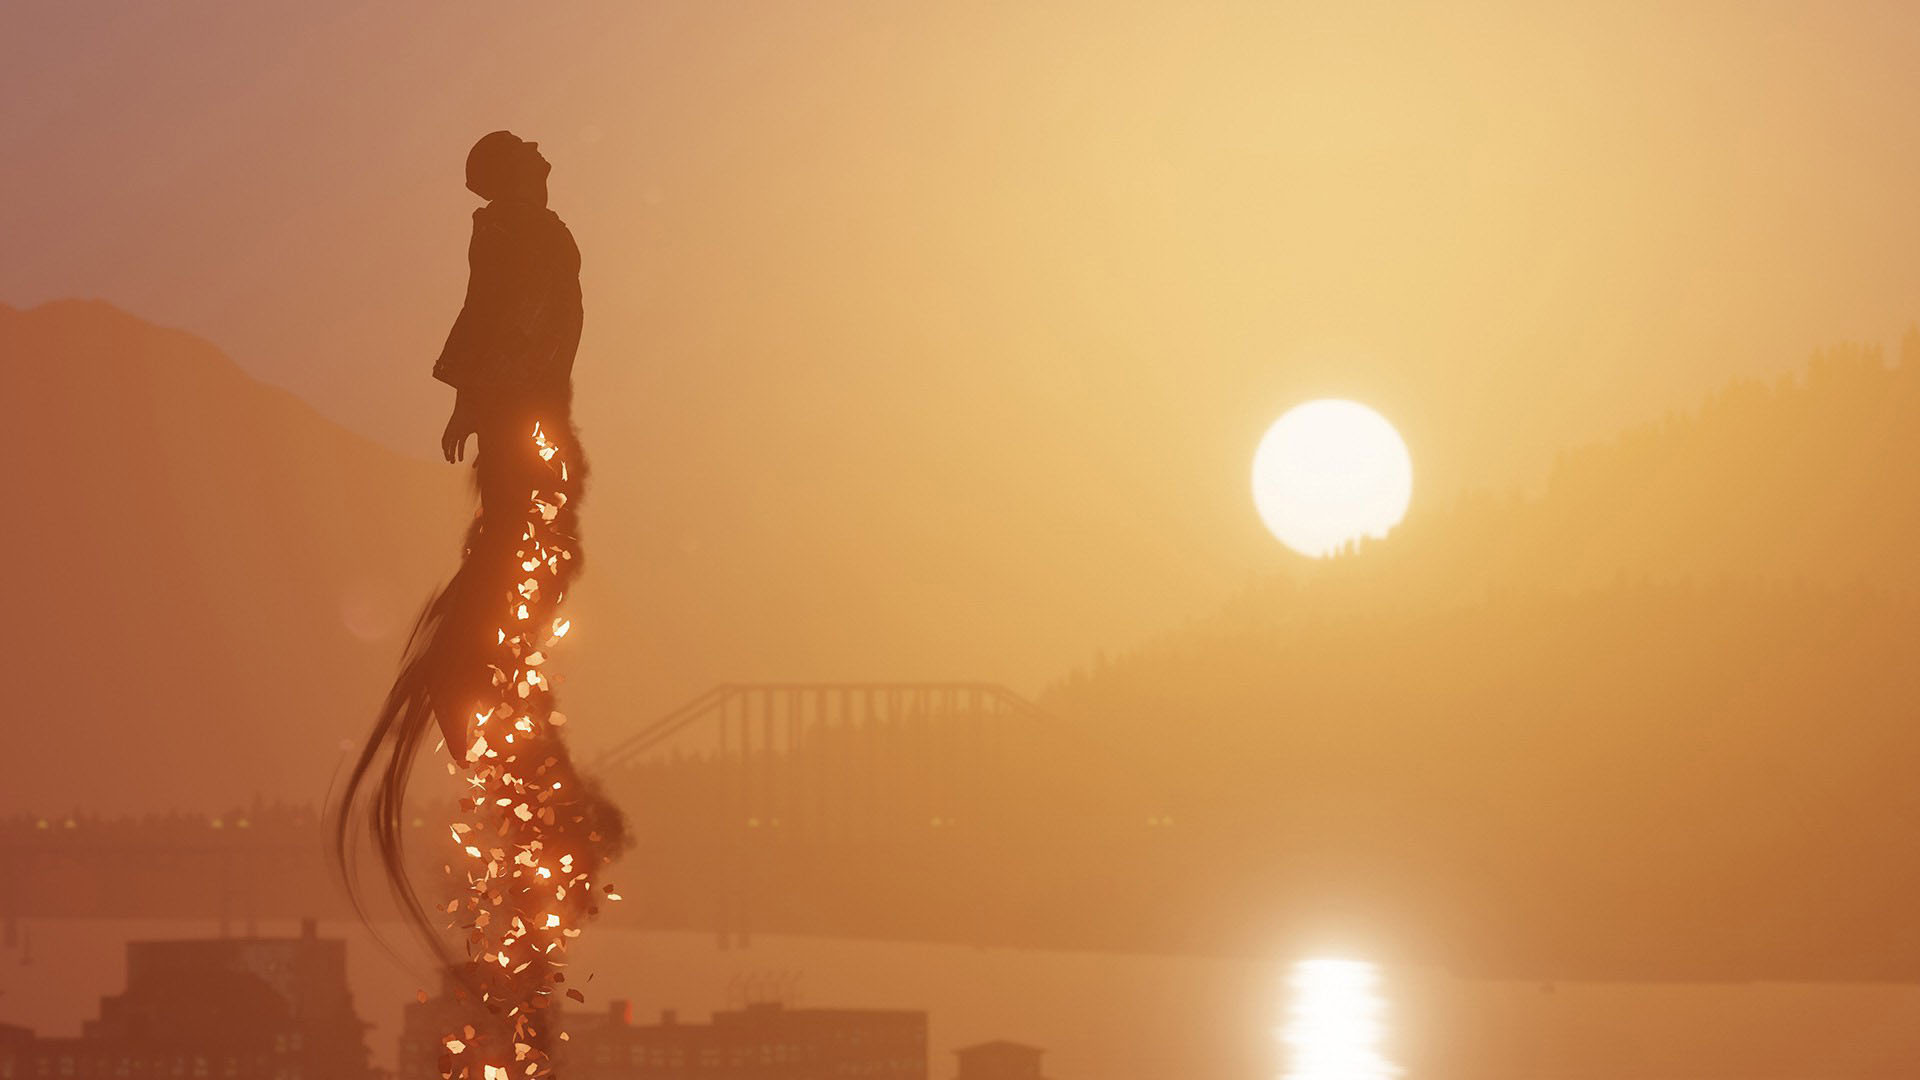 Delsin S Superpower At Sunset Infamous Second Son Wallpaper Jpg